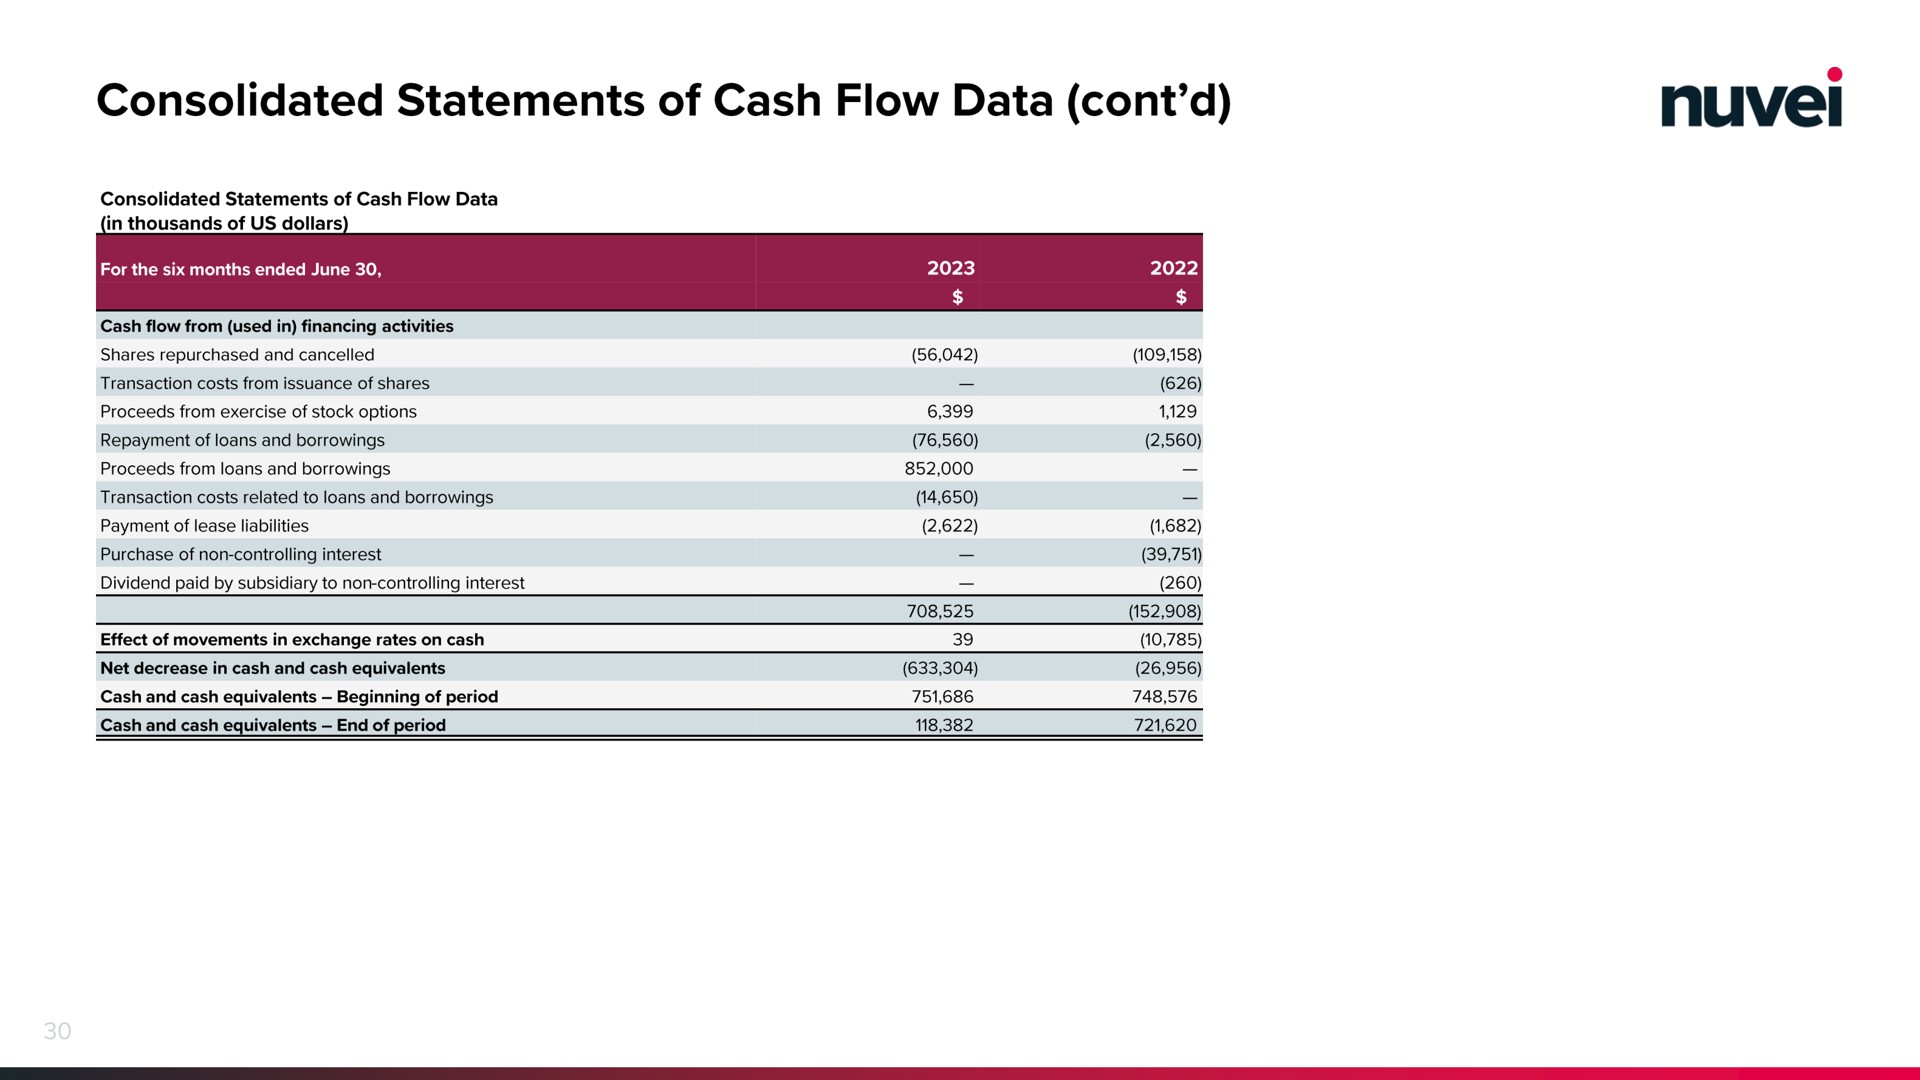 consolidated statements of cash flow data | Nuvei